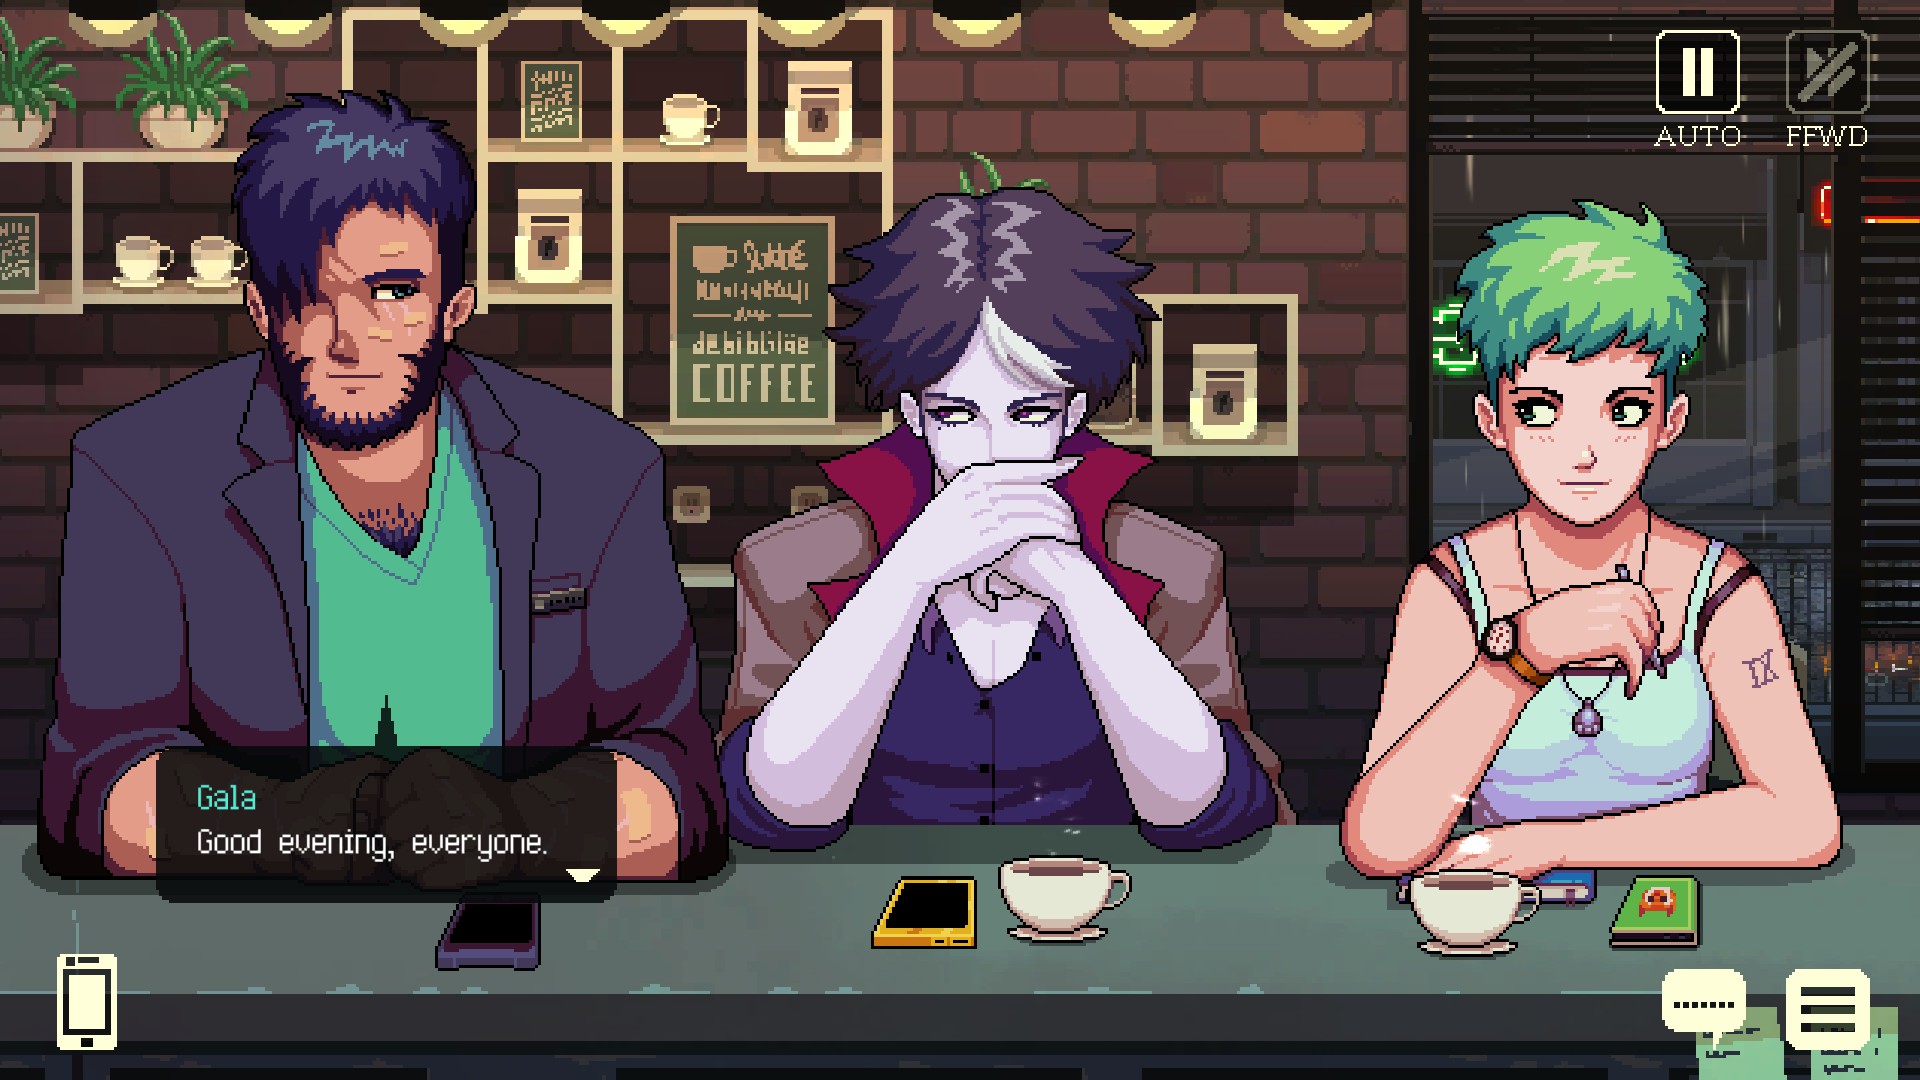 One of the most interesting aspects of Coffee Talk is when the game ends